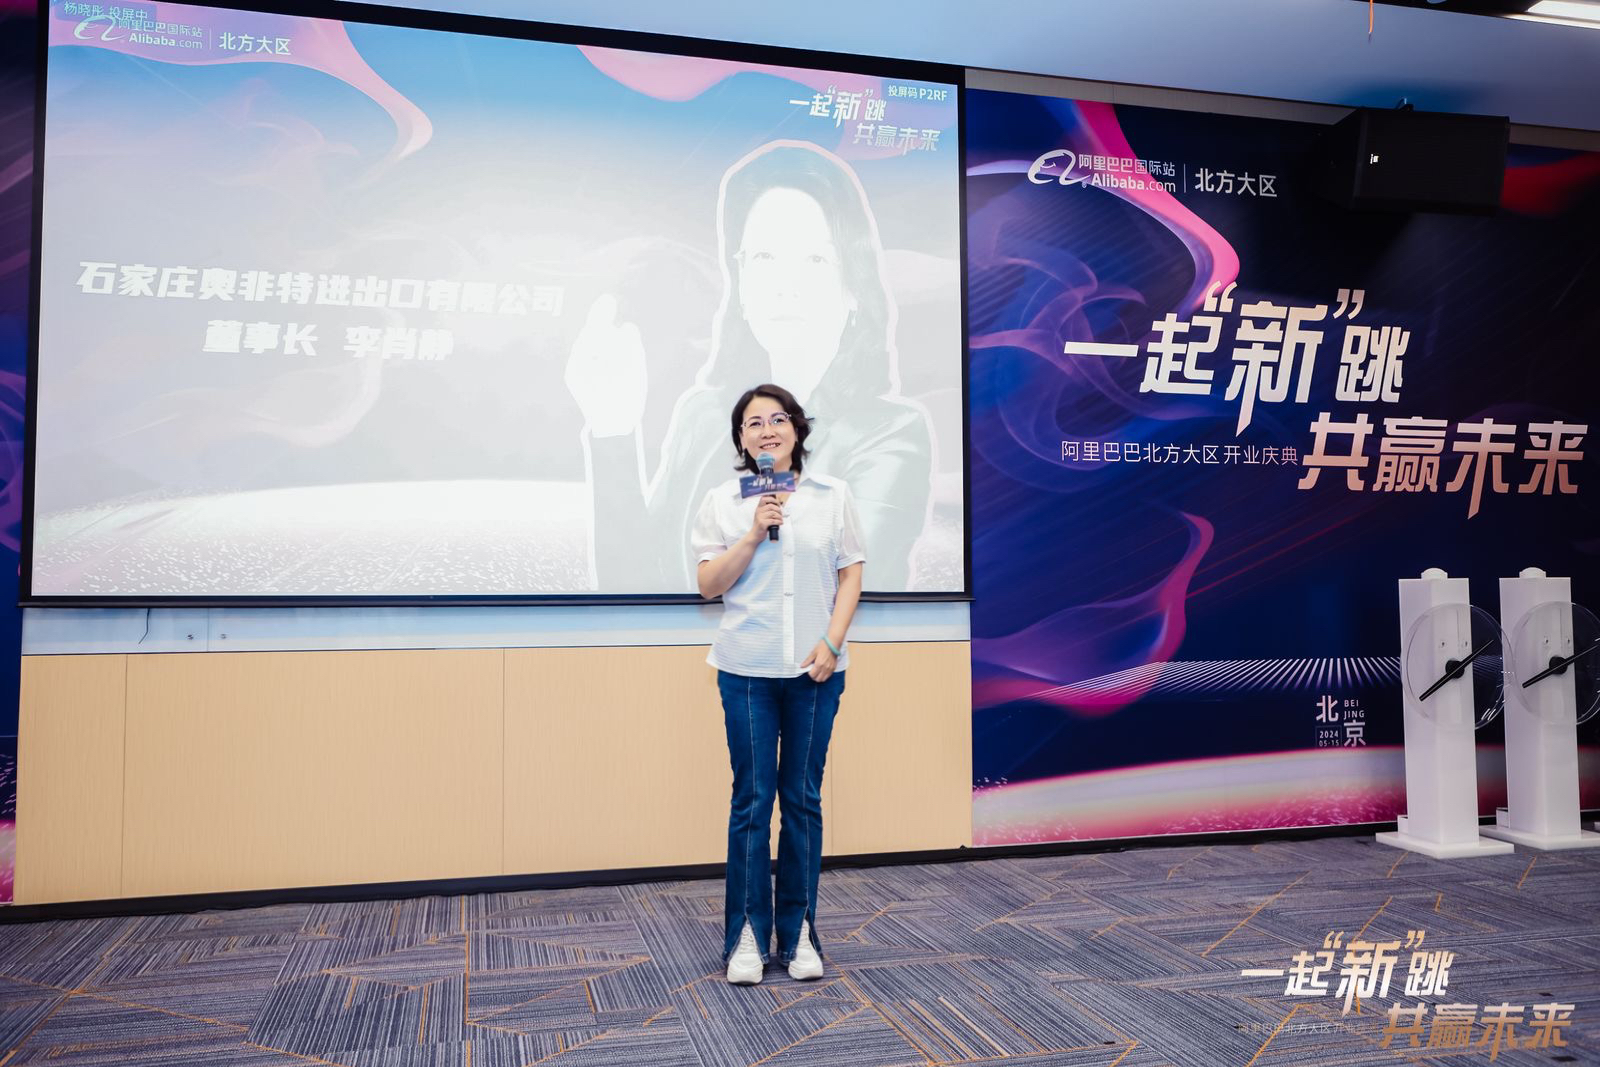 aofit-ceo-wendy-li-concludes-successful-participation-at-alibaba-event (1).jpg